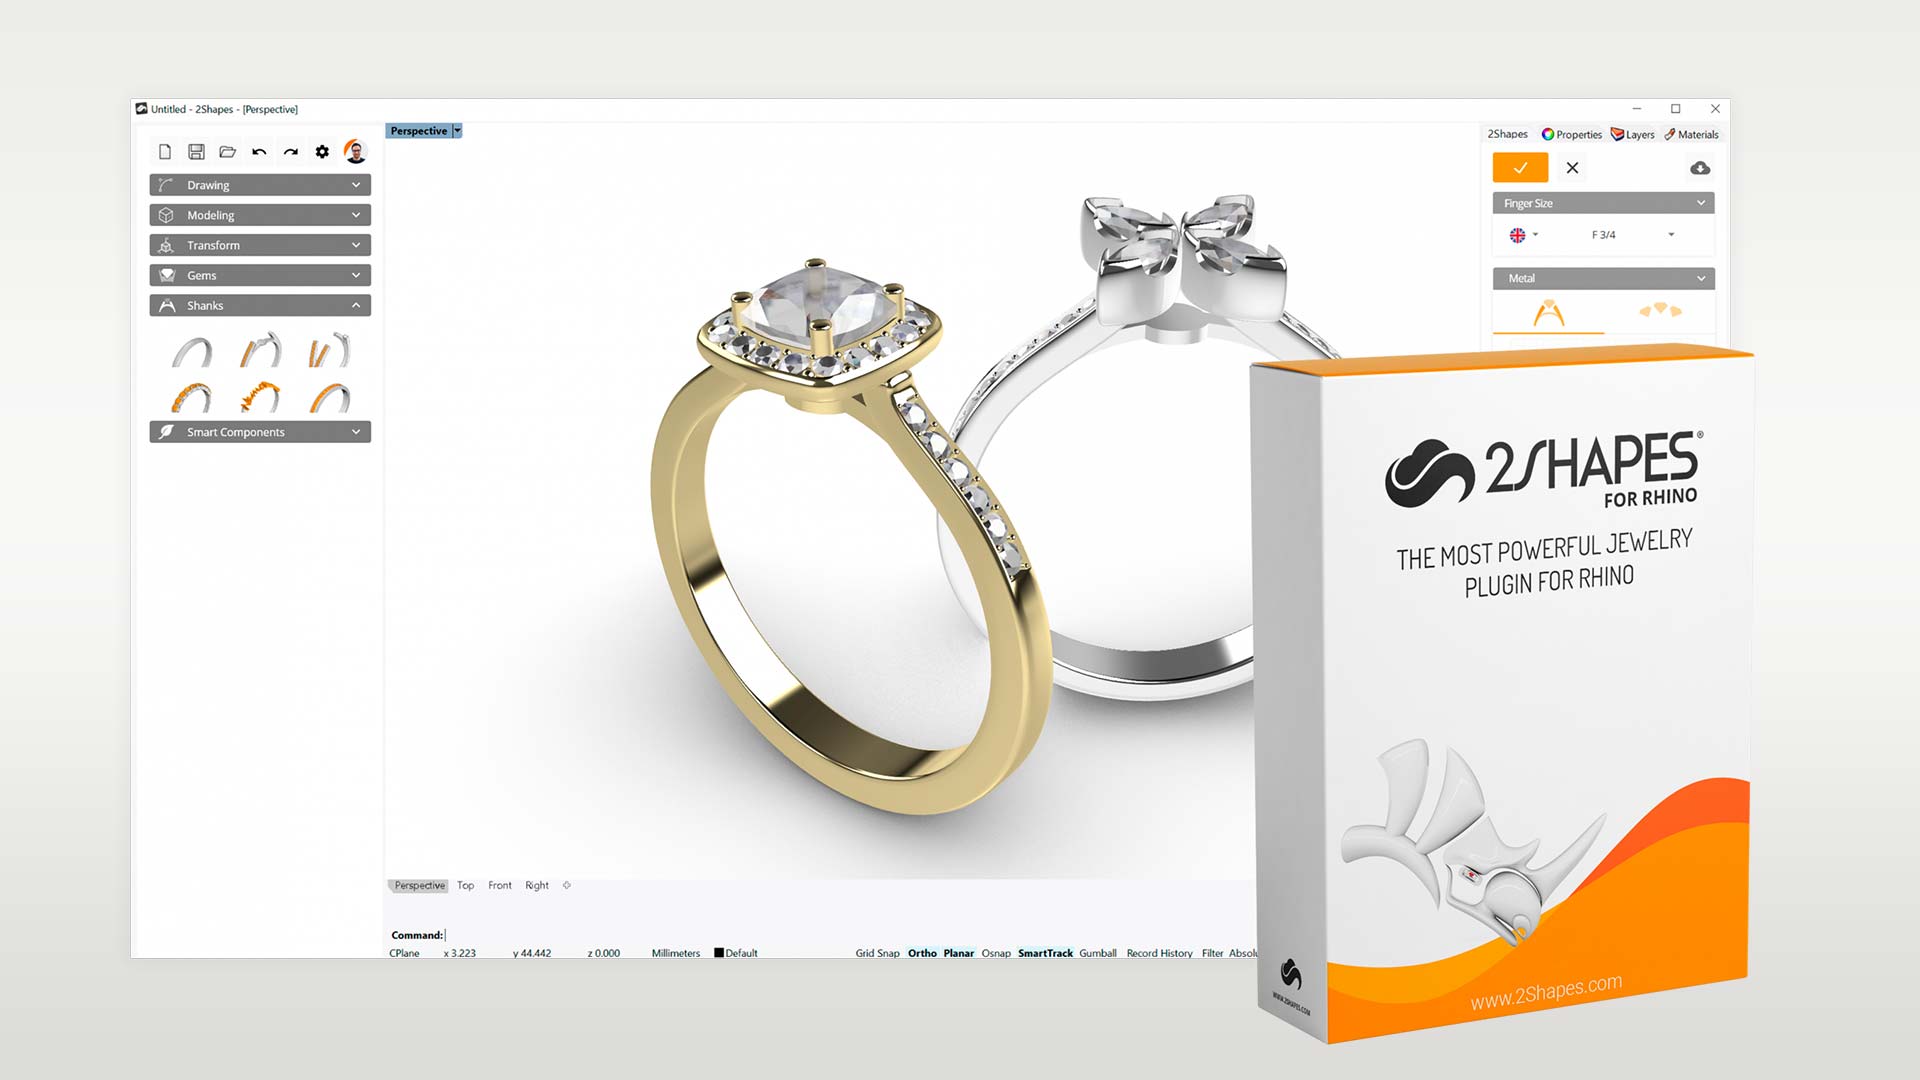 2Shapes for Rhino 4.0 is available - Create stunning jewel designs!